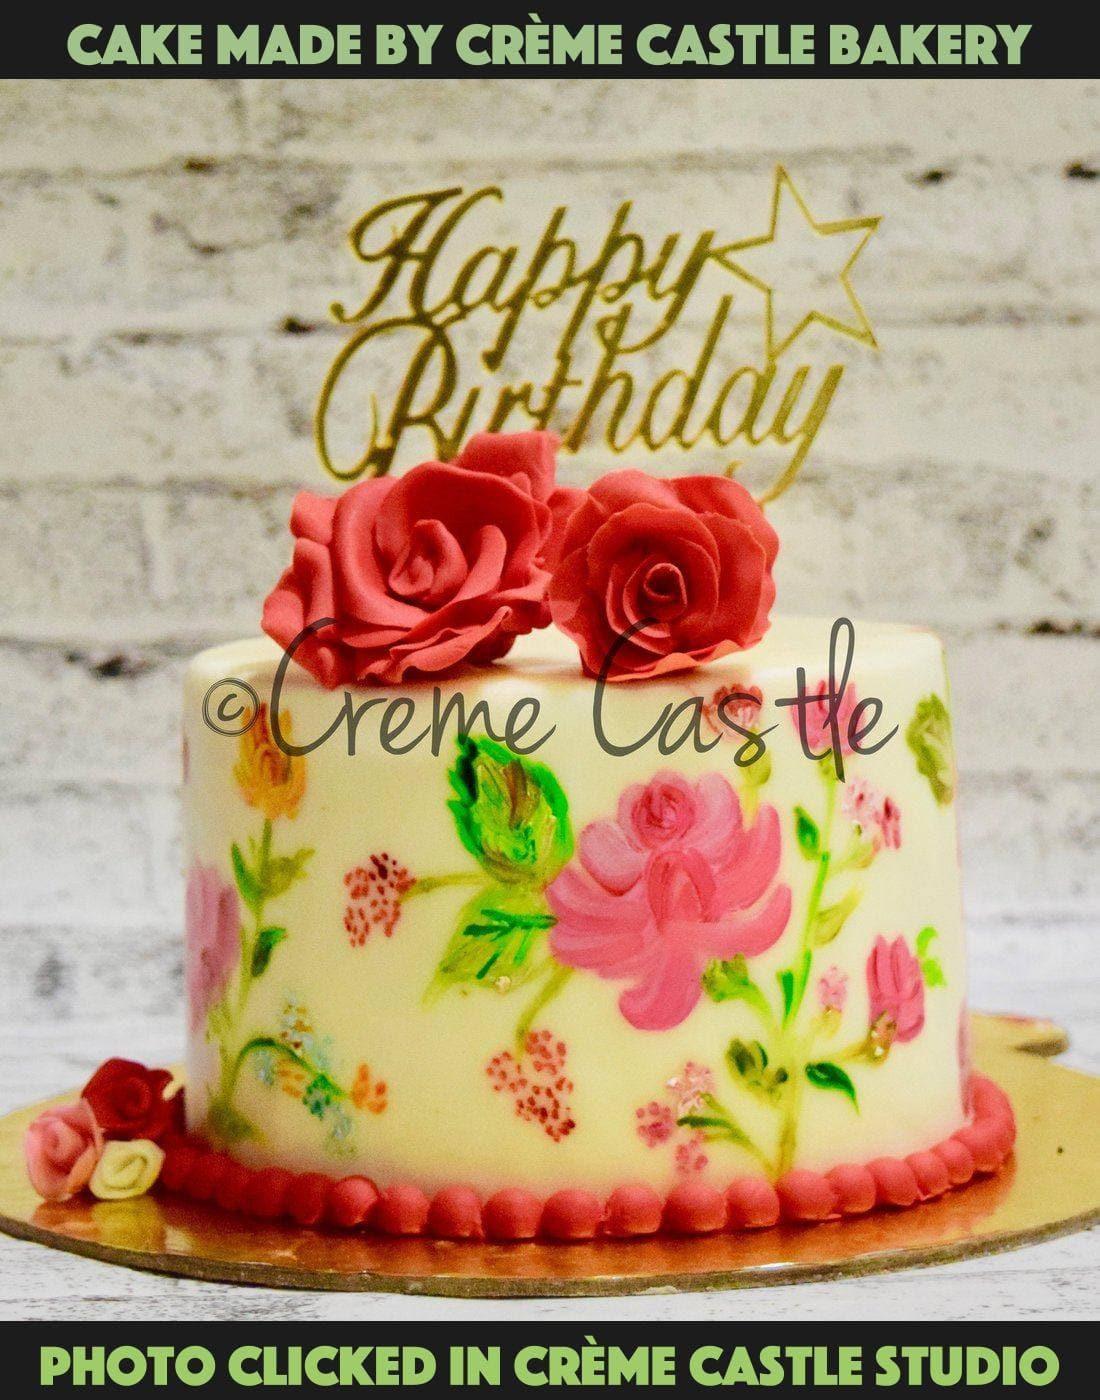 Hand painted floral cake 1 - Creme Castle